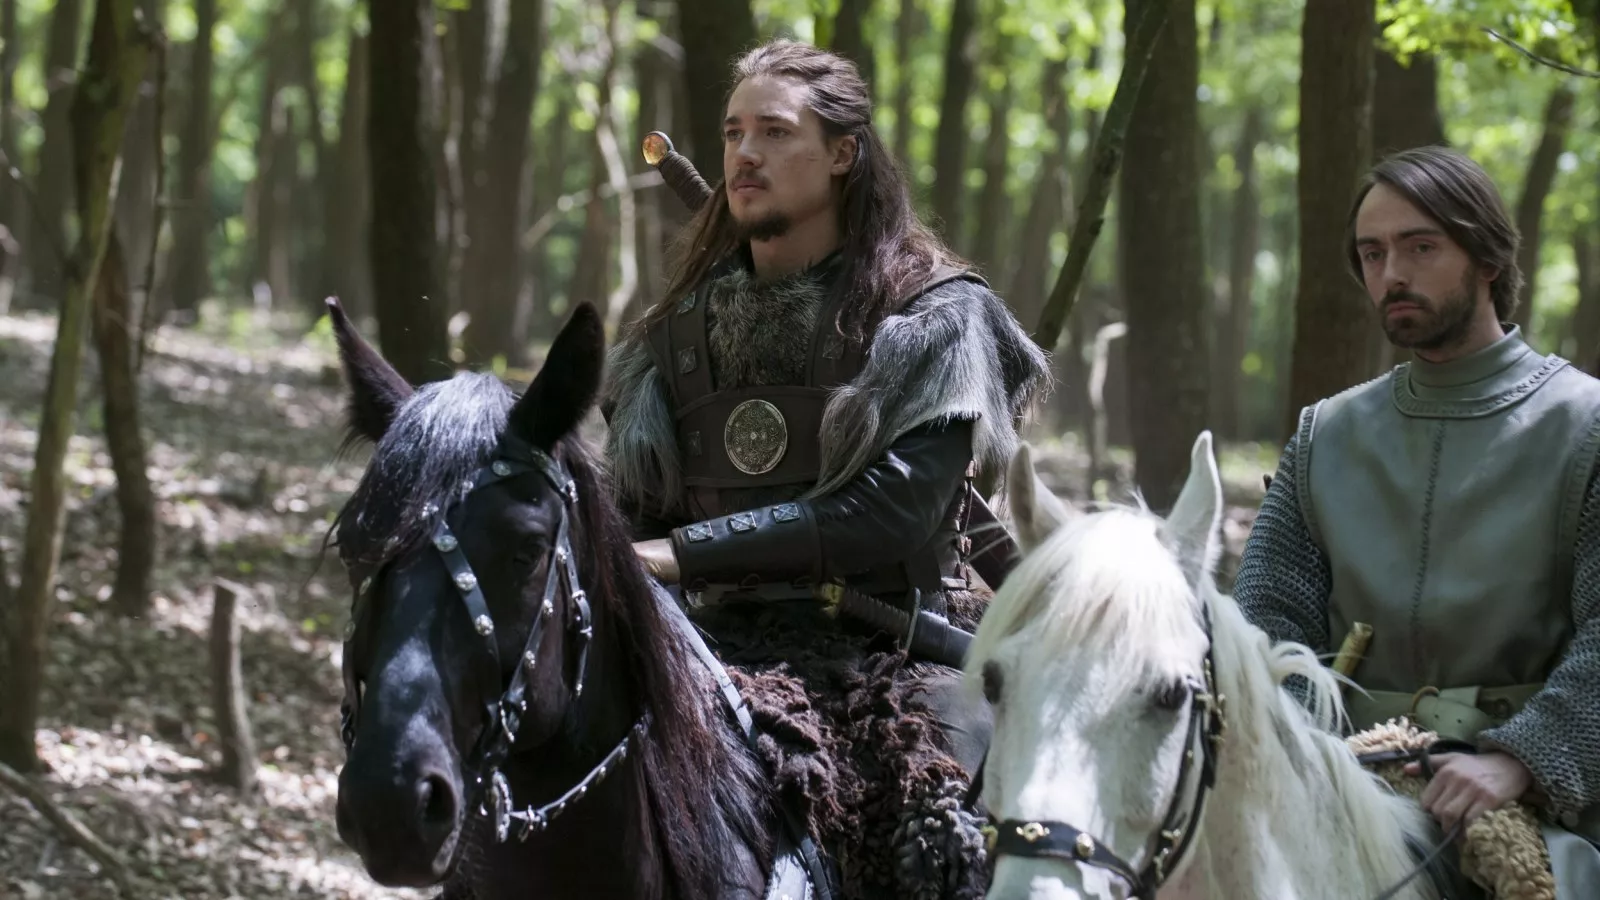 Found out today that I'm a descendant of Uhtred the Bold : r